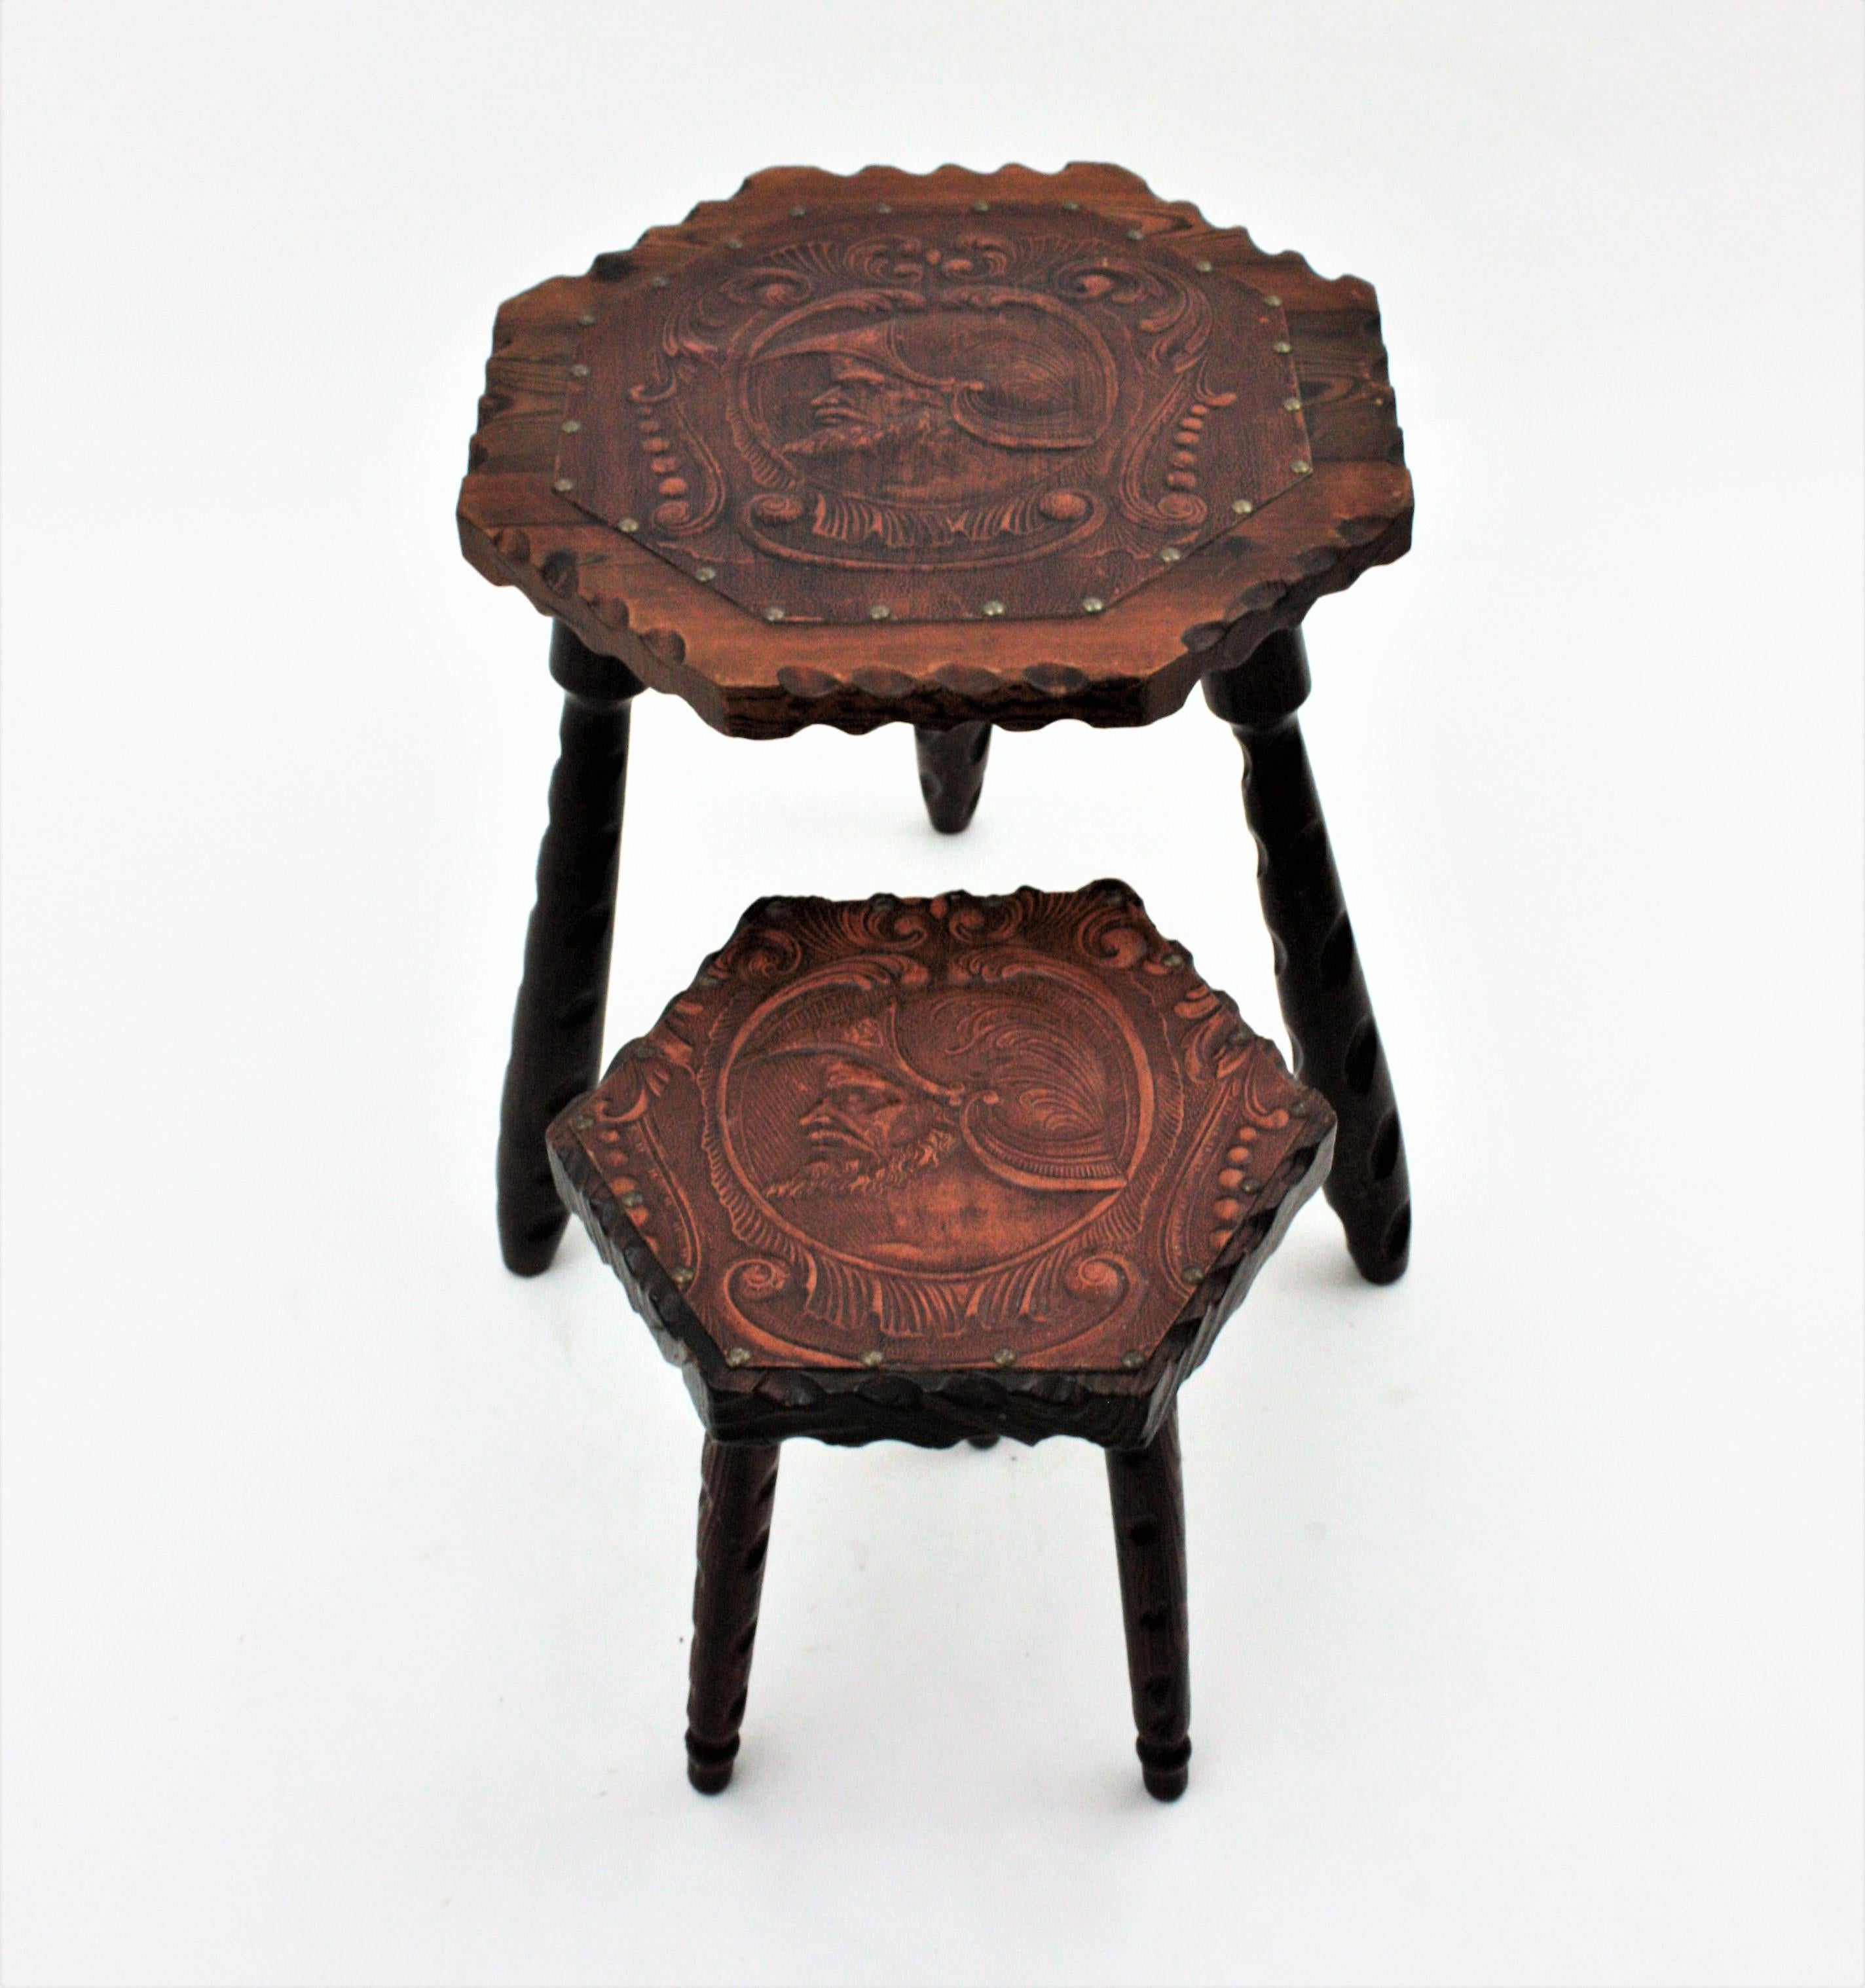 Handcarved pine wood gueridon tables with Leather top and tripod base. Spain, 1940s.
The tabletop in hexagonal shape have scalloped details.Supported on turned legs with scalloped details. Both tops are adorned by a repousse leather ornamentation